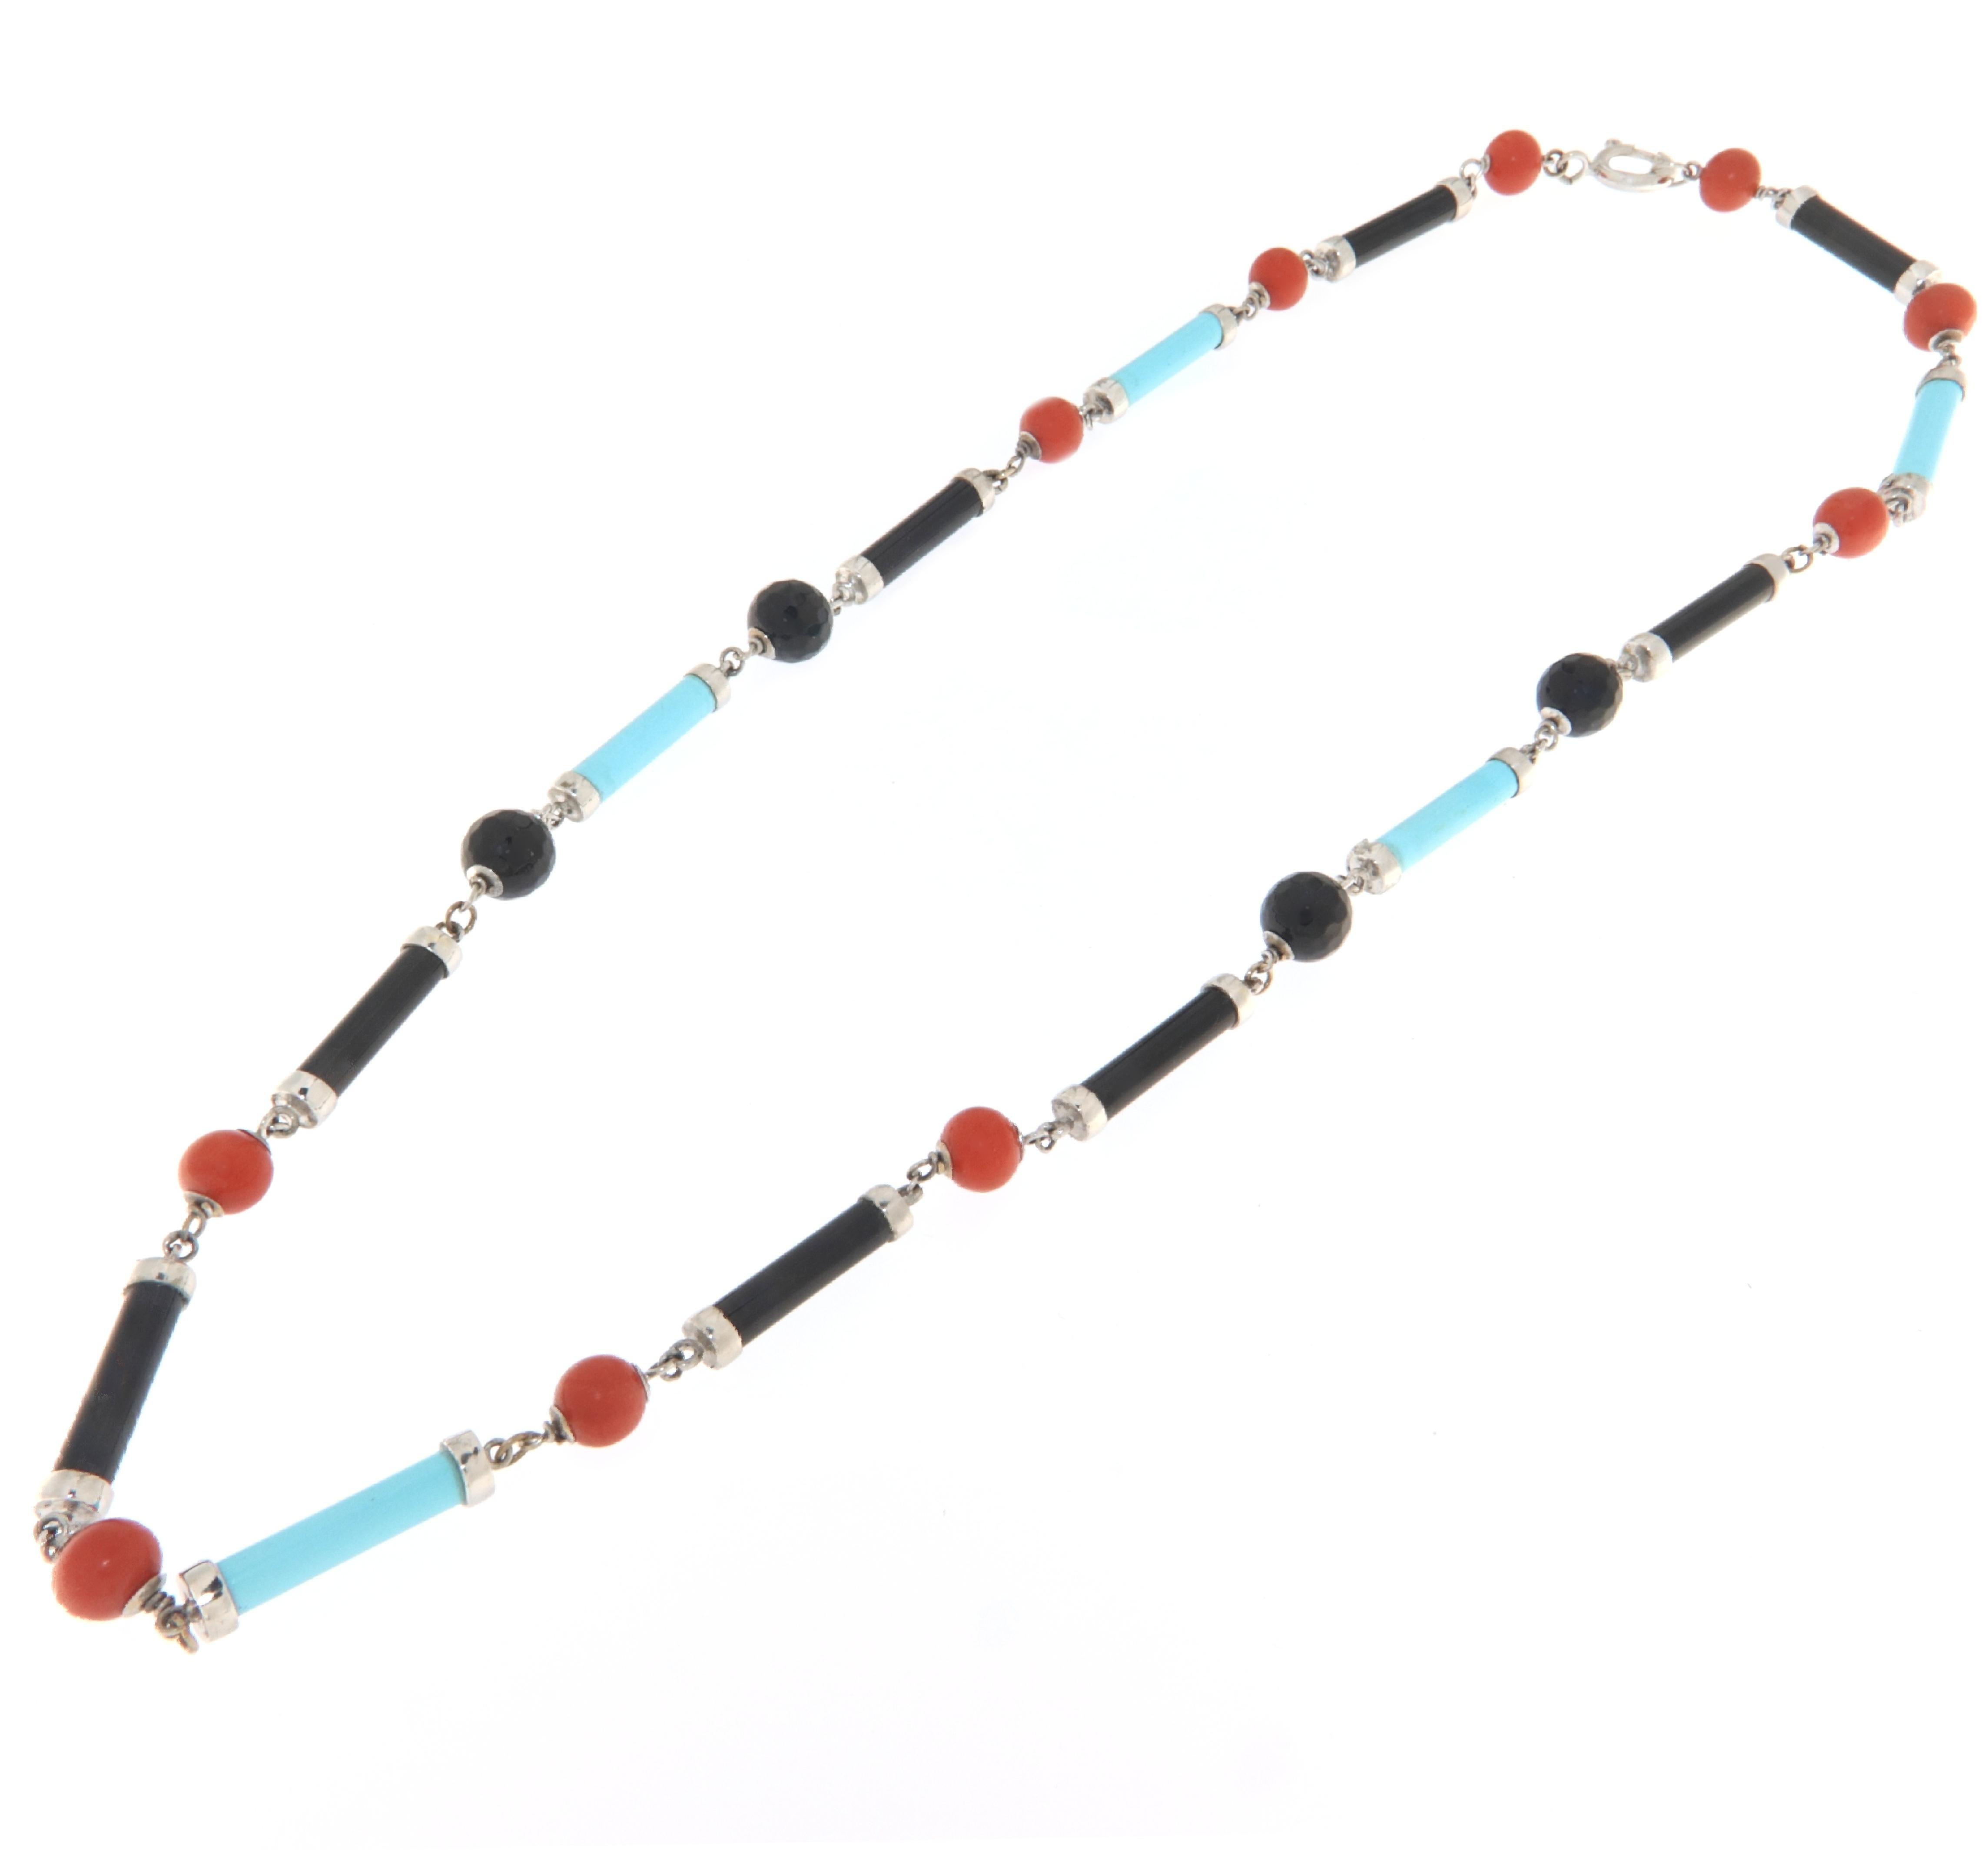 This sophisticated necklace in 18-karat white gold exemplifies timeless elegance, enriched by an alternating series of coral and onyx spheres with barrels of onyx and turquoise. The warmth of the coral's red hue creates a delightful contrast with